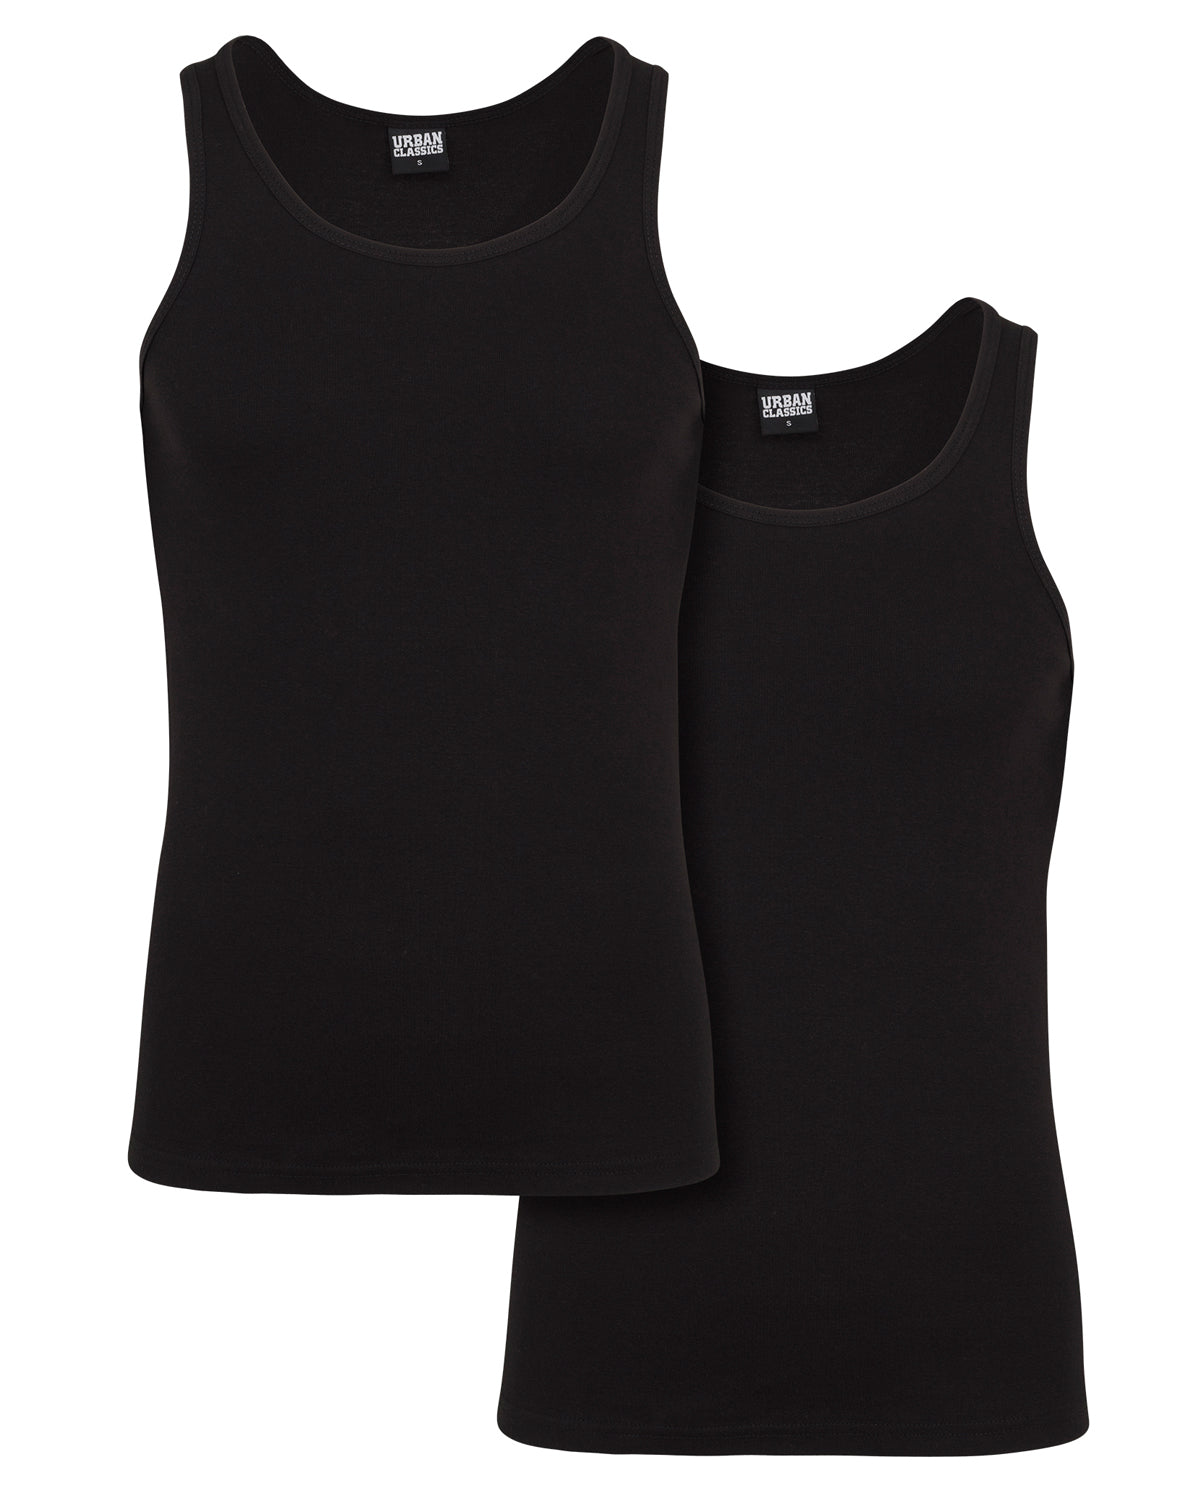 Men's sleeveless shirts from domestic online store